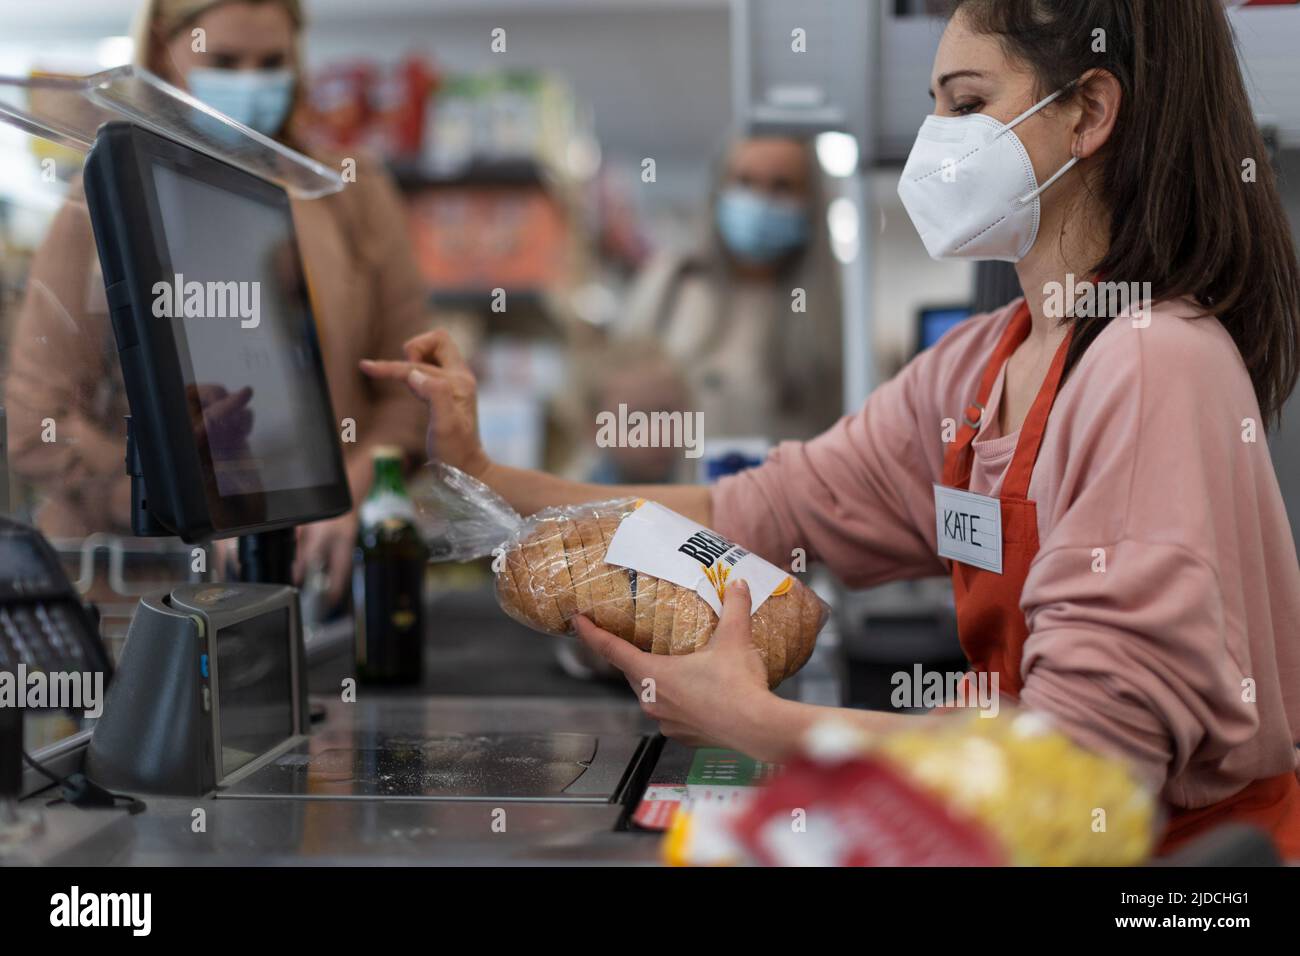 Checkout counter hands of the cashier scans groceries in supermarket, during pandemic. Stock Photo